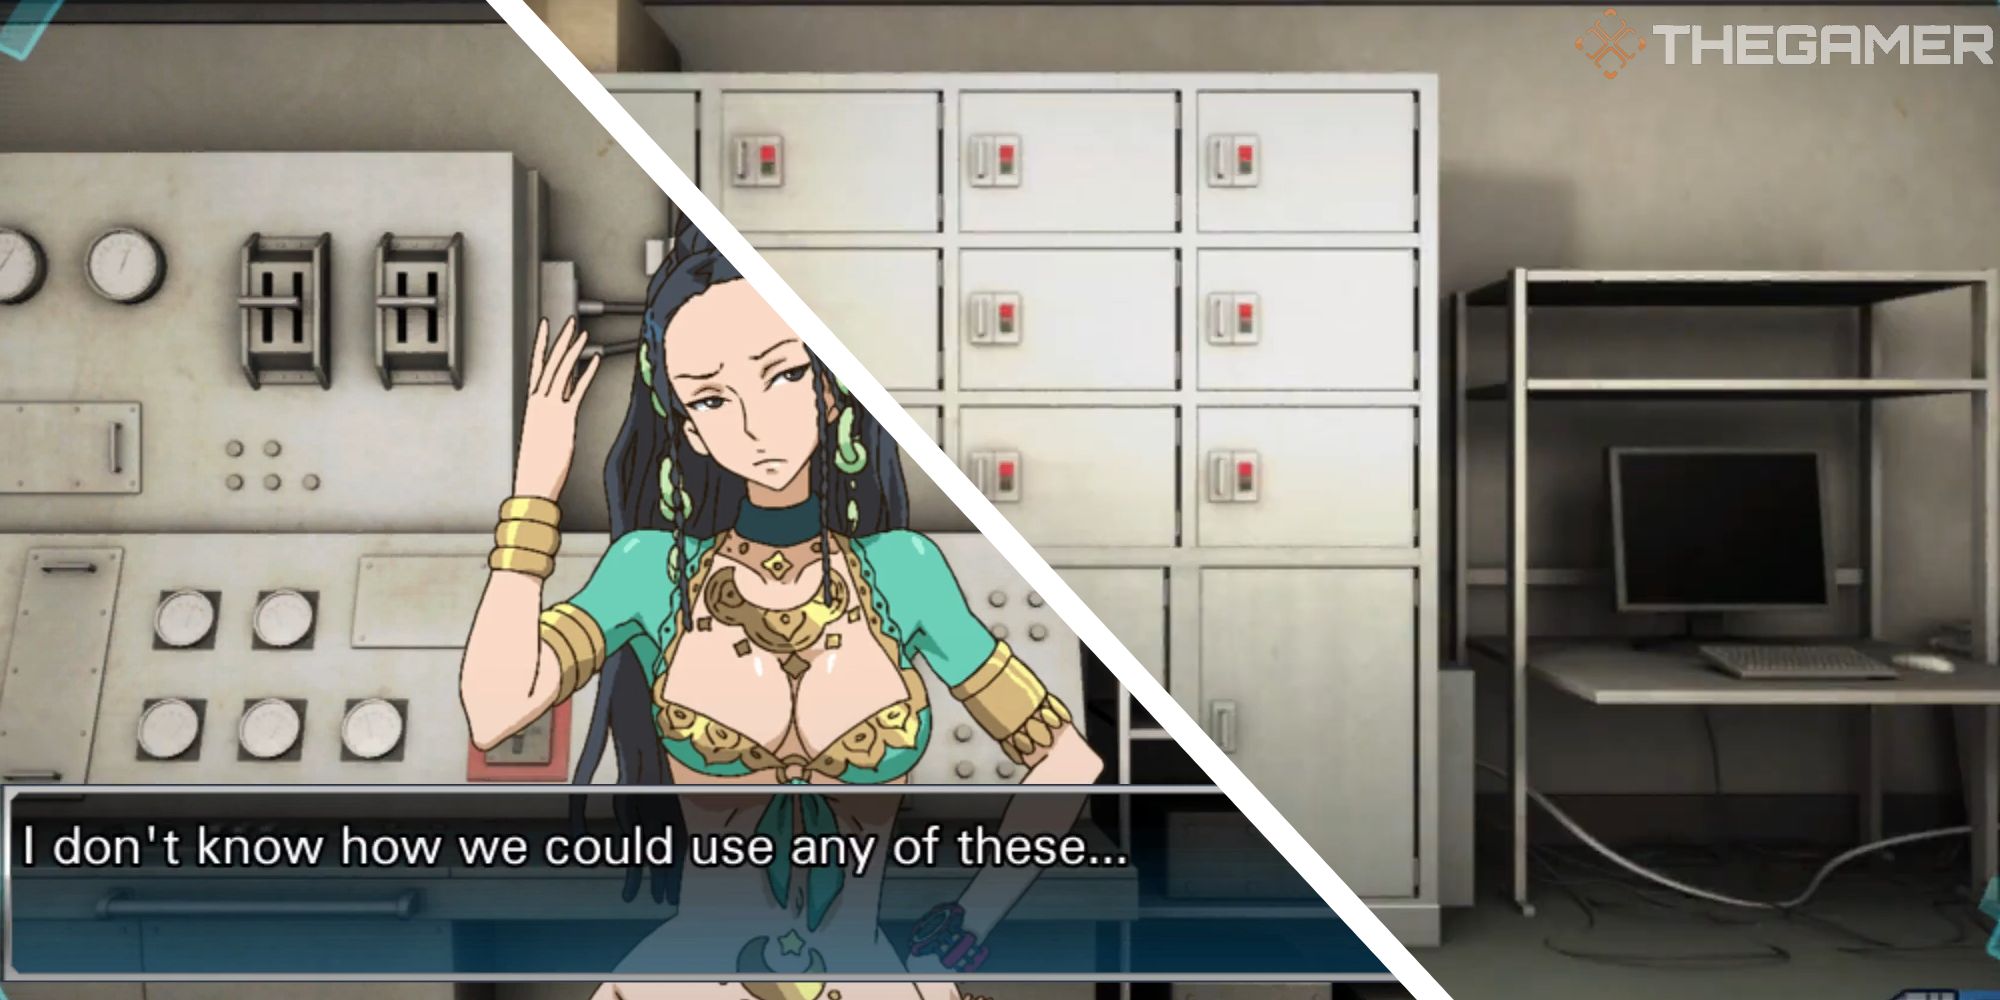 image of junpei talking to lotus, next to image of computer and lockers